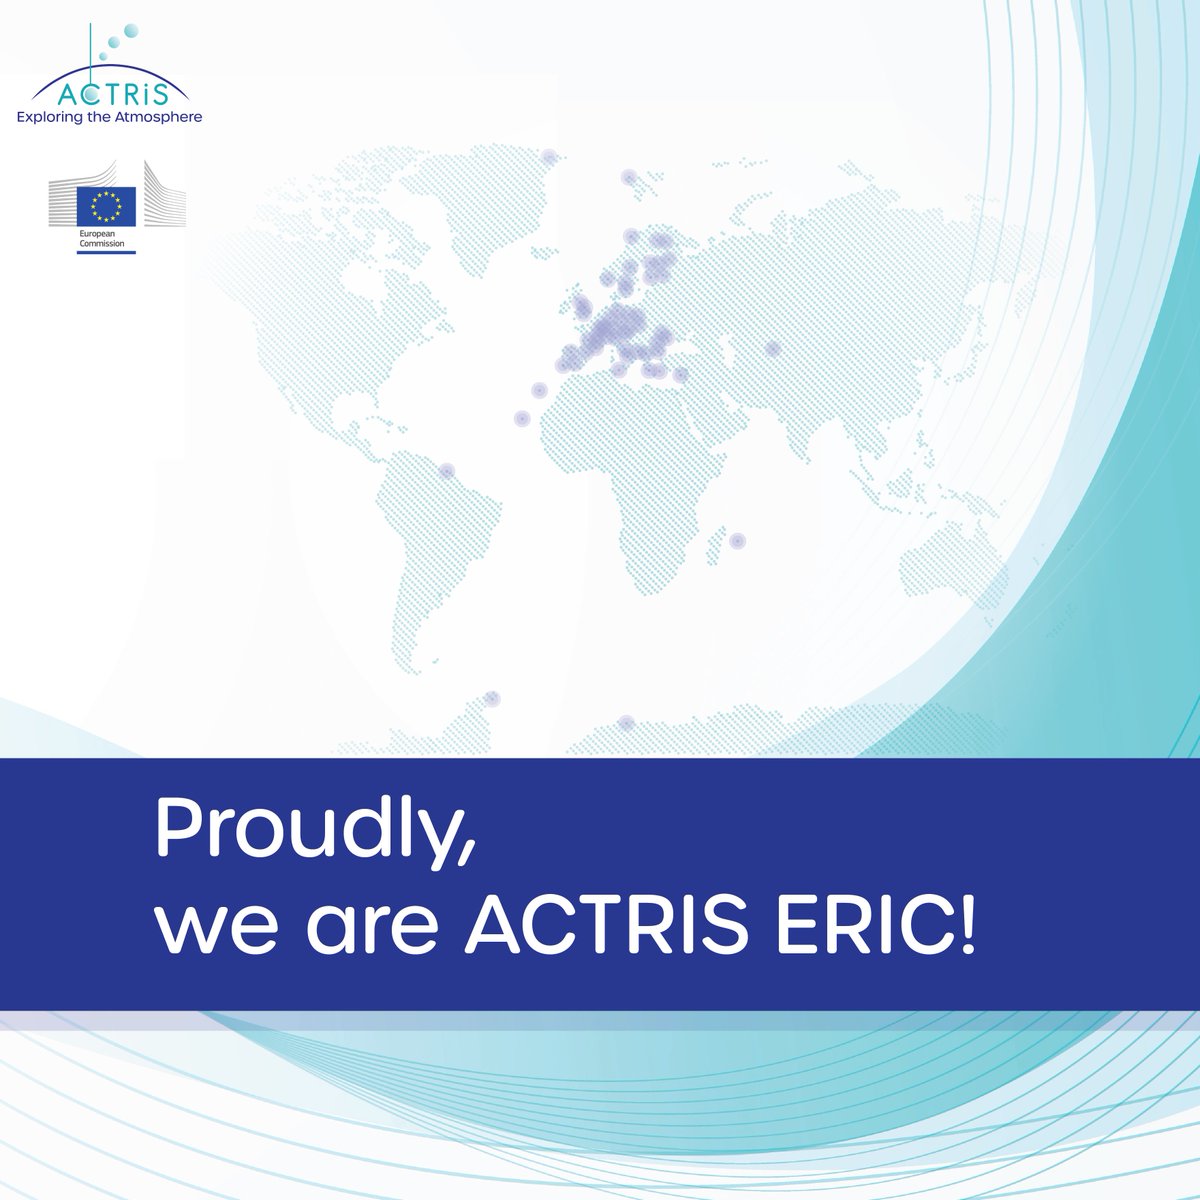 Today we celebrate! We proudly announce that ACTRIS ERIC was officially established by @EU_Commission. Congratulations to the whole #ACTRIScommunity! #WeAreACTRIS #EU_RIs #Research_Infrastructures #EUH2020 #EuropeanResearchArea